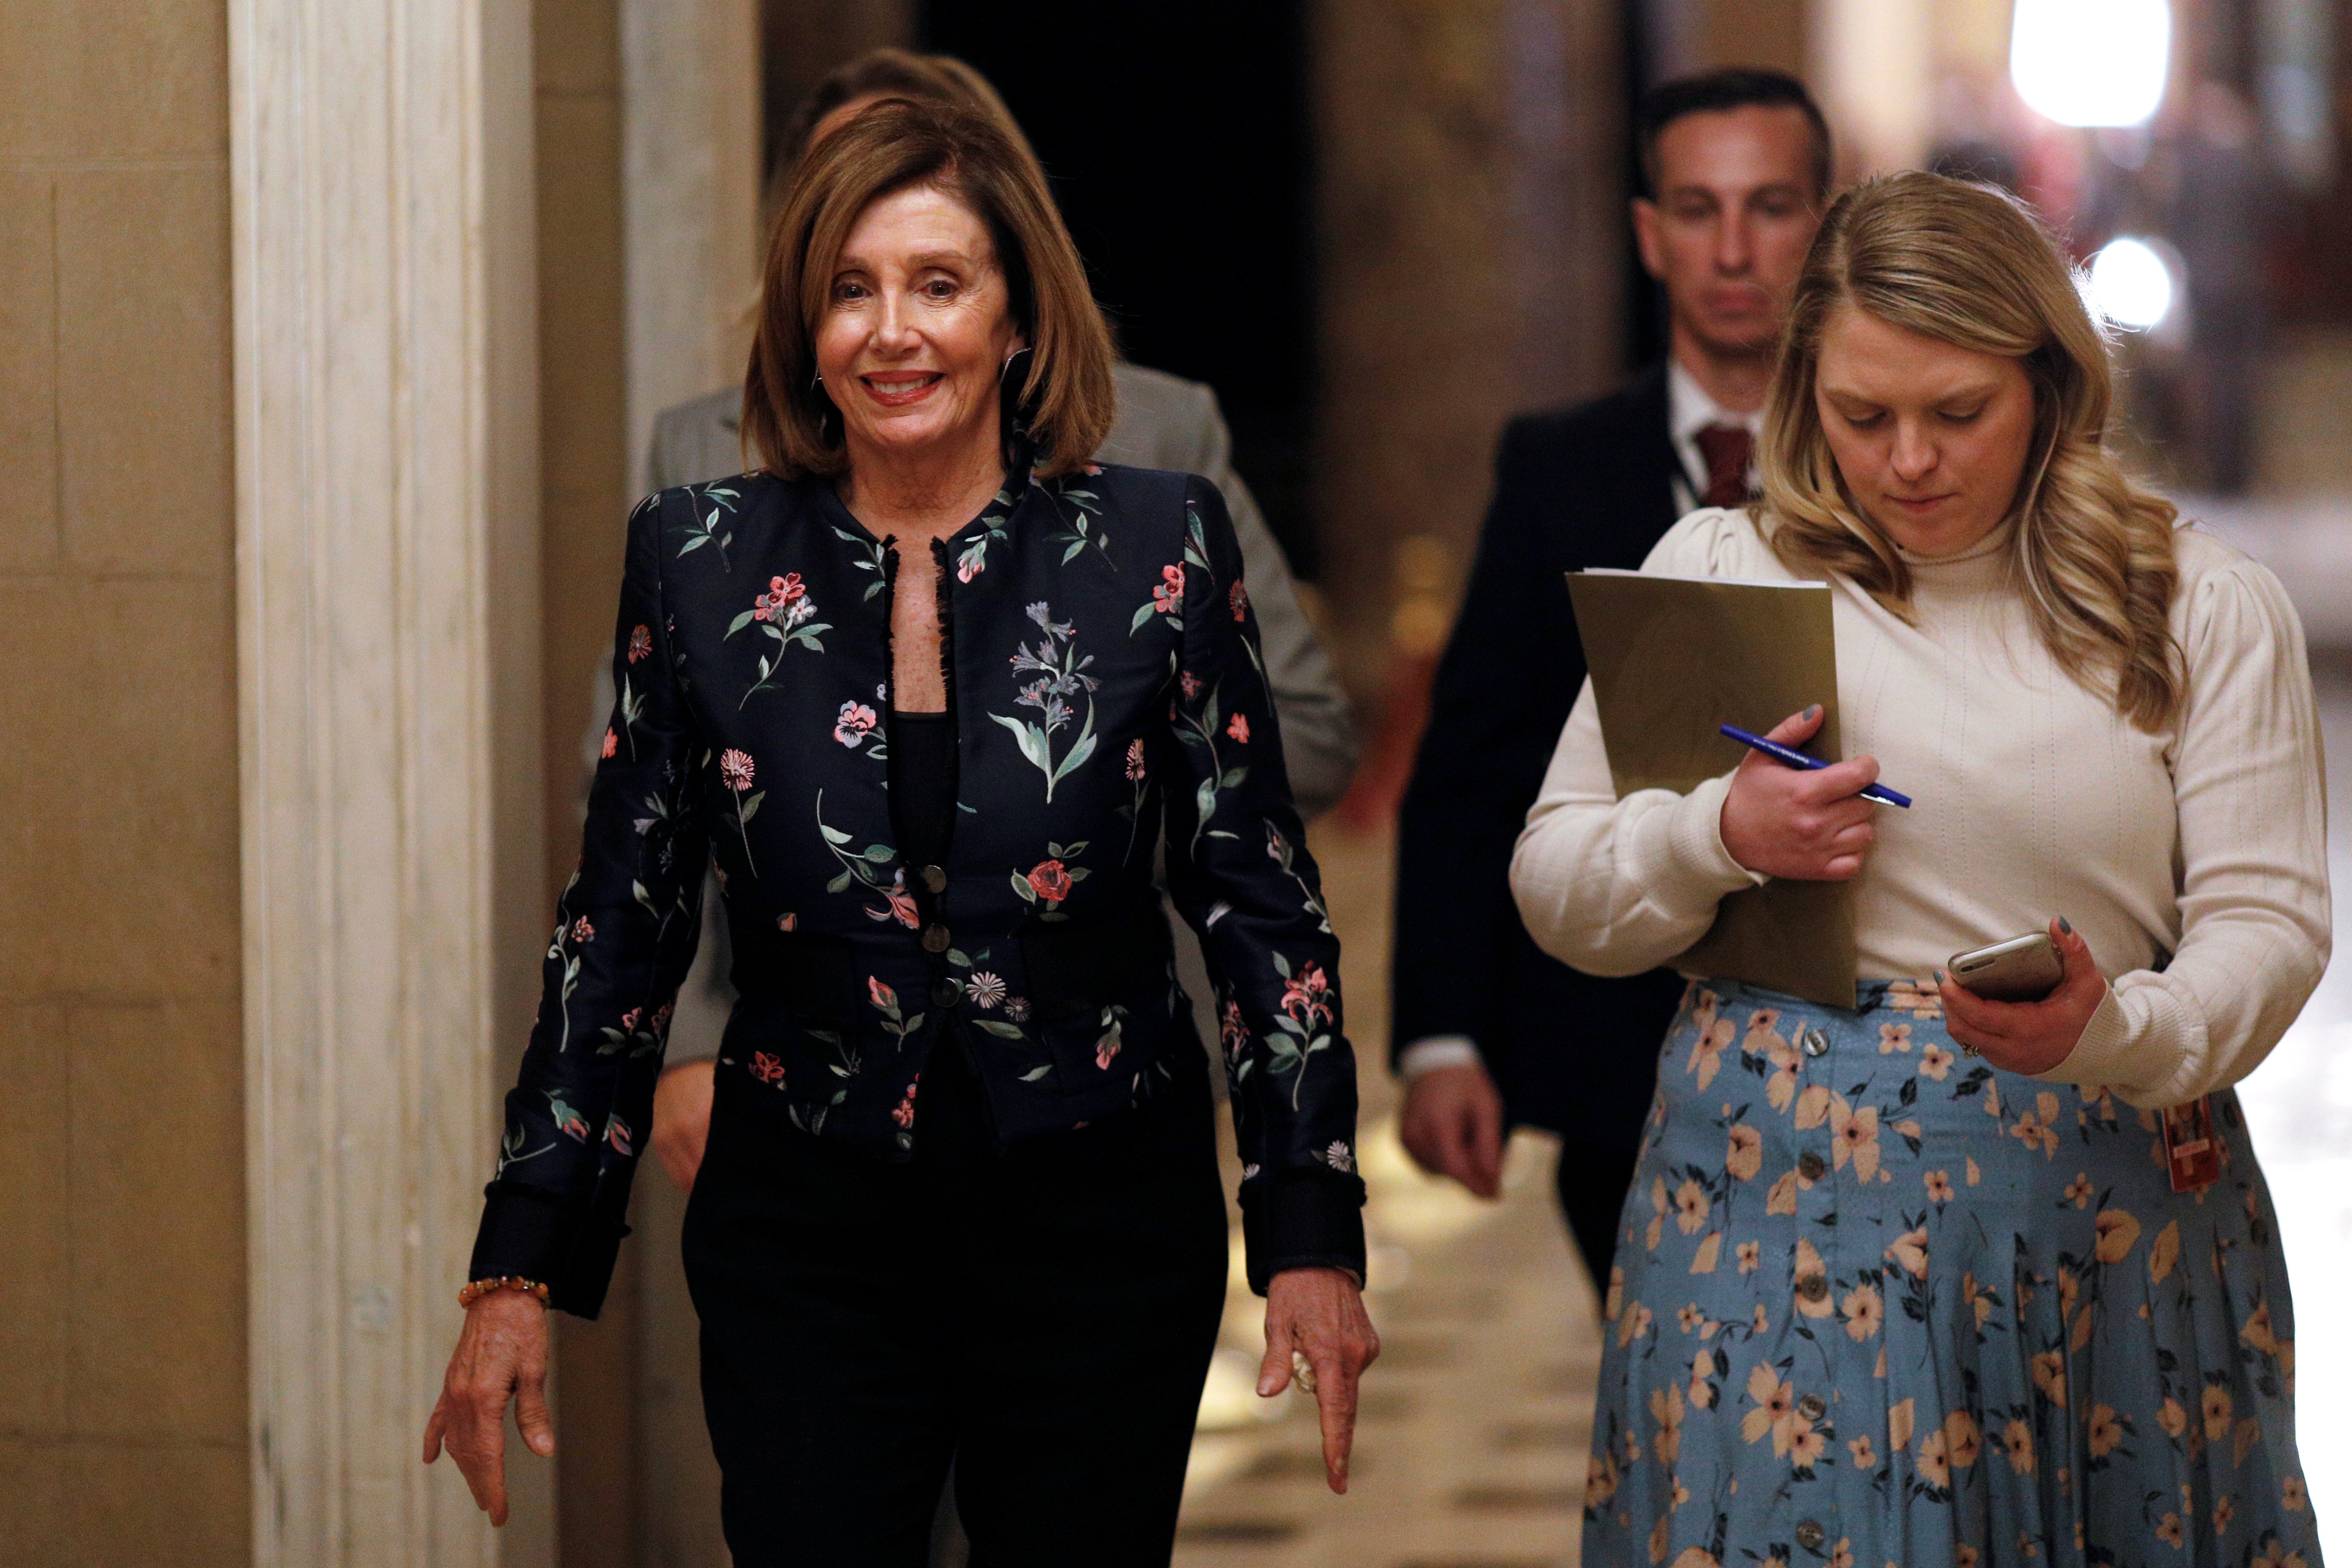 U.S. House Speaker Nancy Pelosi (D-CA) walks to her office following a vote in the House of Representatives on the limitations of war power on U.S. President Donald Trump at the U.S. Capitol in Washington, U.S., Jan. 9, 2020. REUTERS/Tom Brenner 